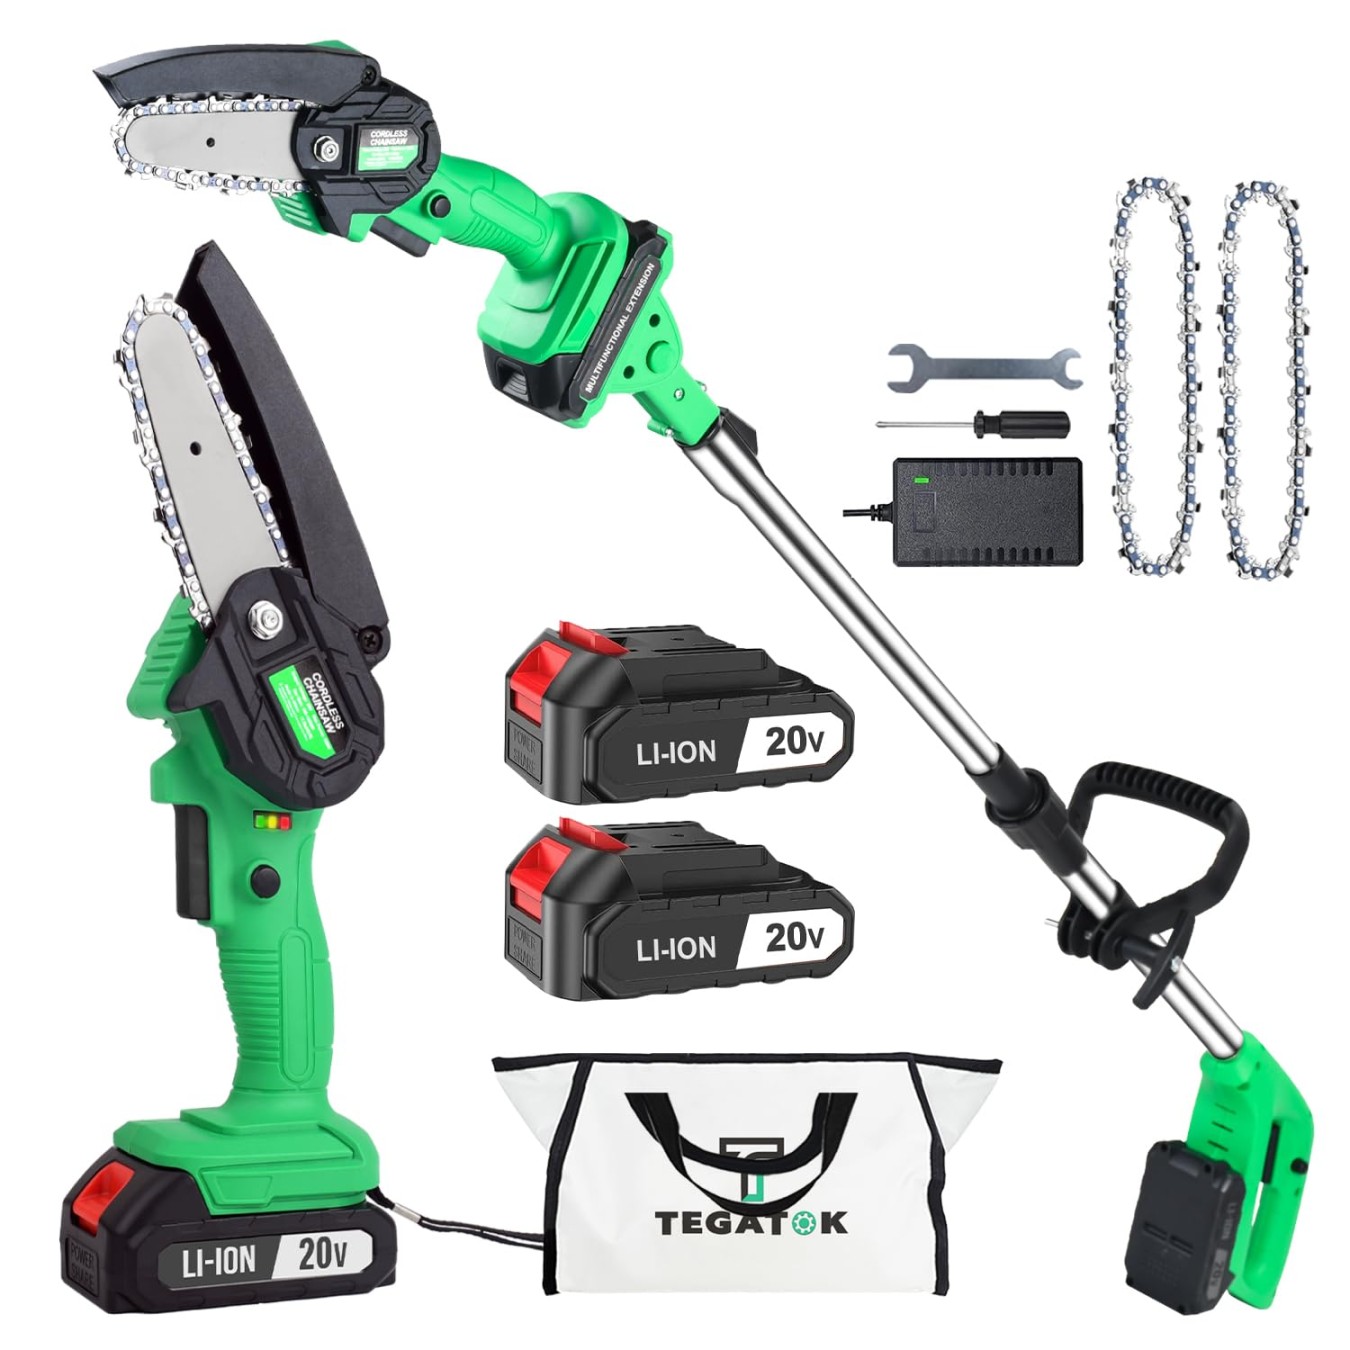 cordless-pole-saw-amp-mini-chainsaw-in-electric-pole-saw-with-batteries-and-chains-pole-saw-battery-powered-with-ft-extension-rod Pole Saw Battery Review: Choosing the Right Power Source for Your Needs picture